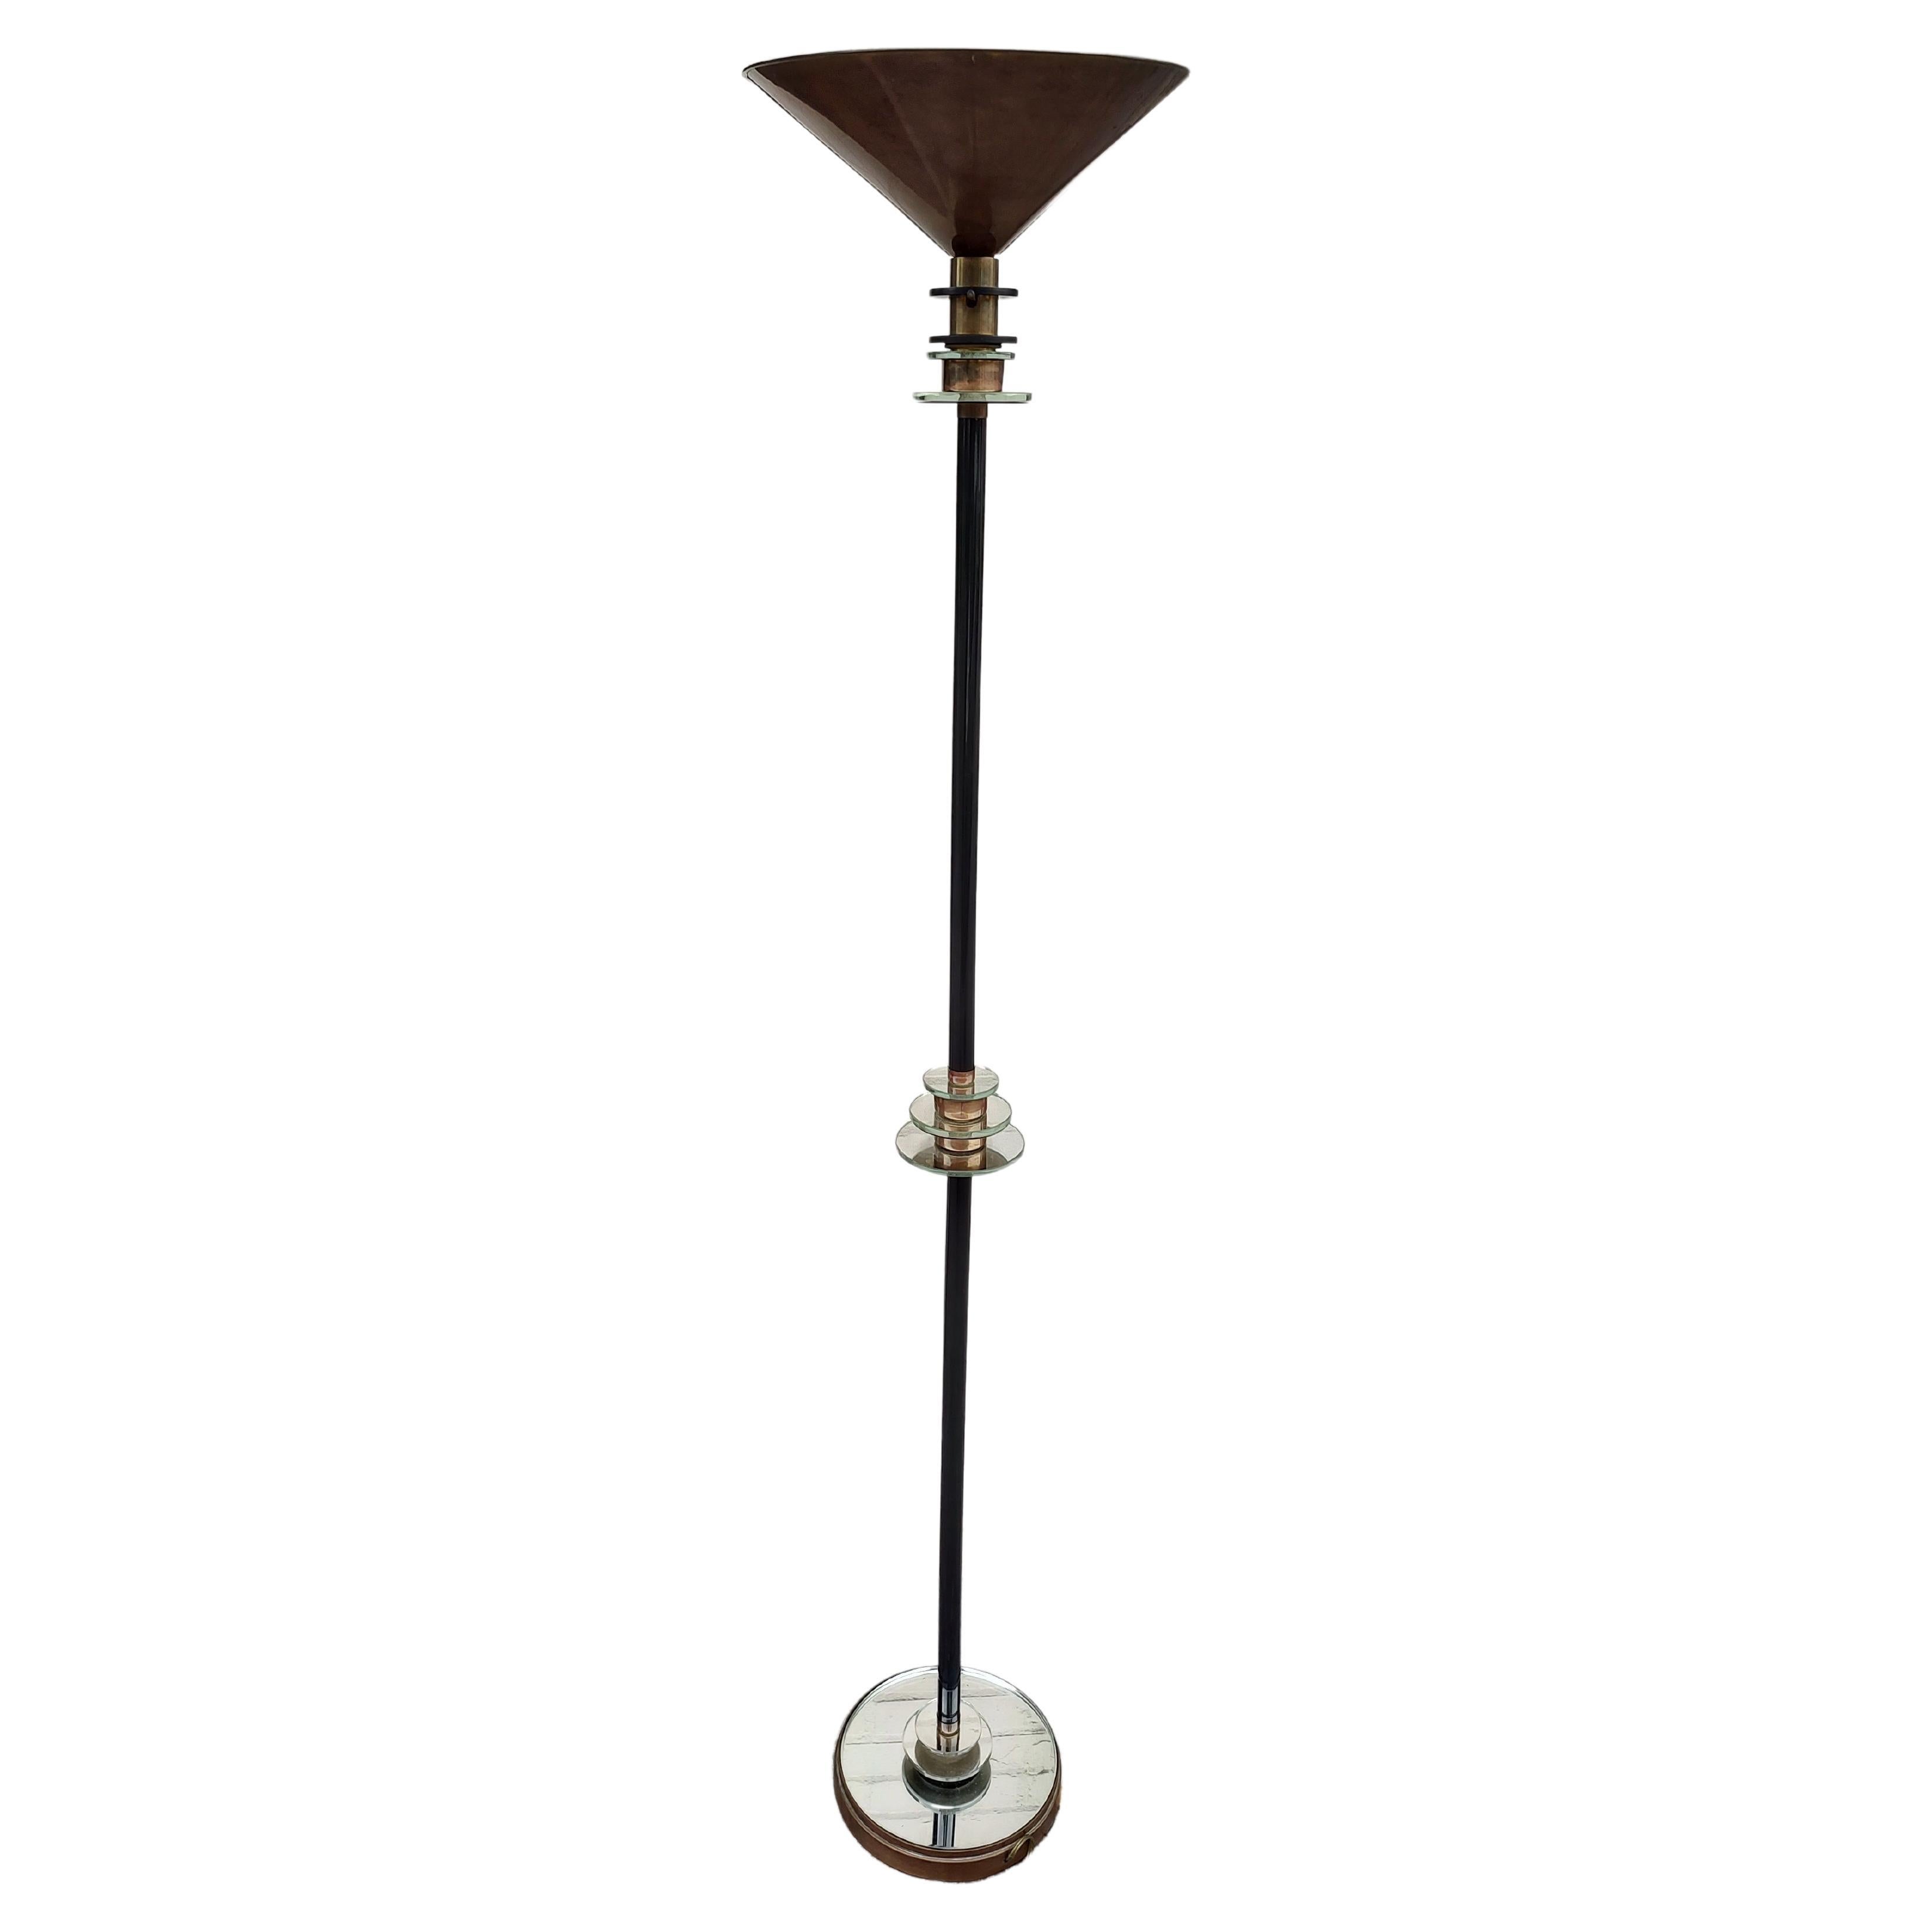 Metal Art Deco Torchiere Floor Lamp with Stepped Mirror Design For Sale